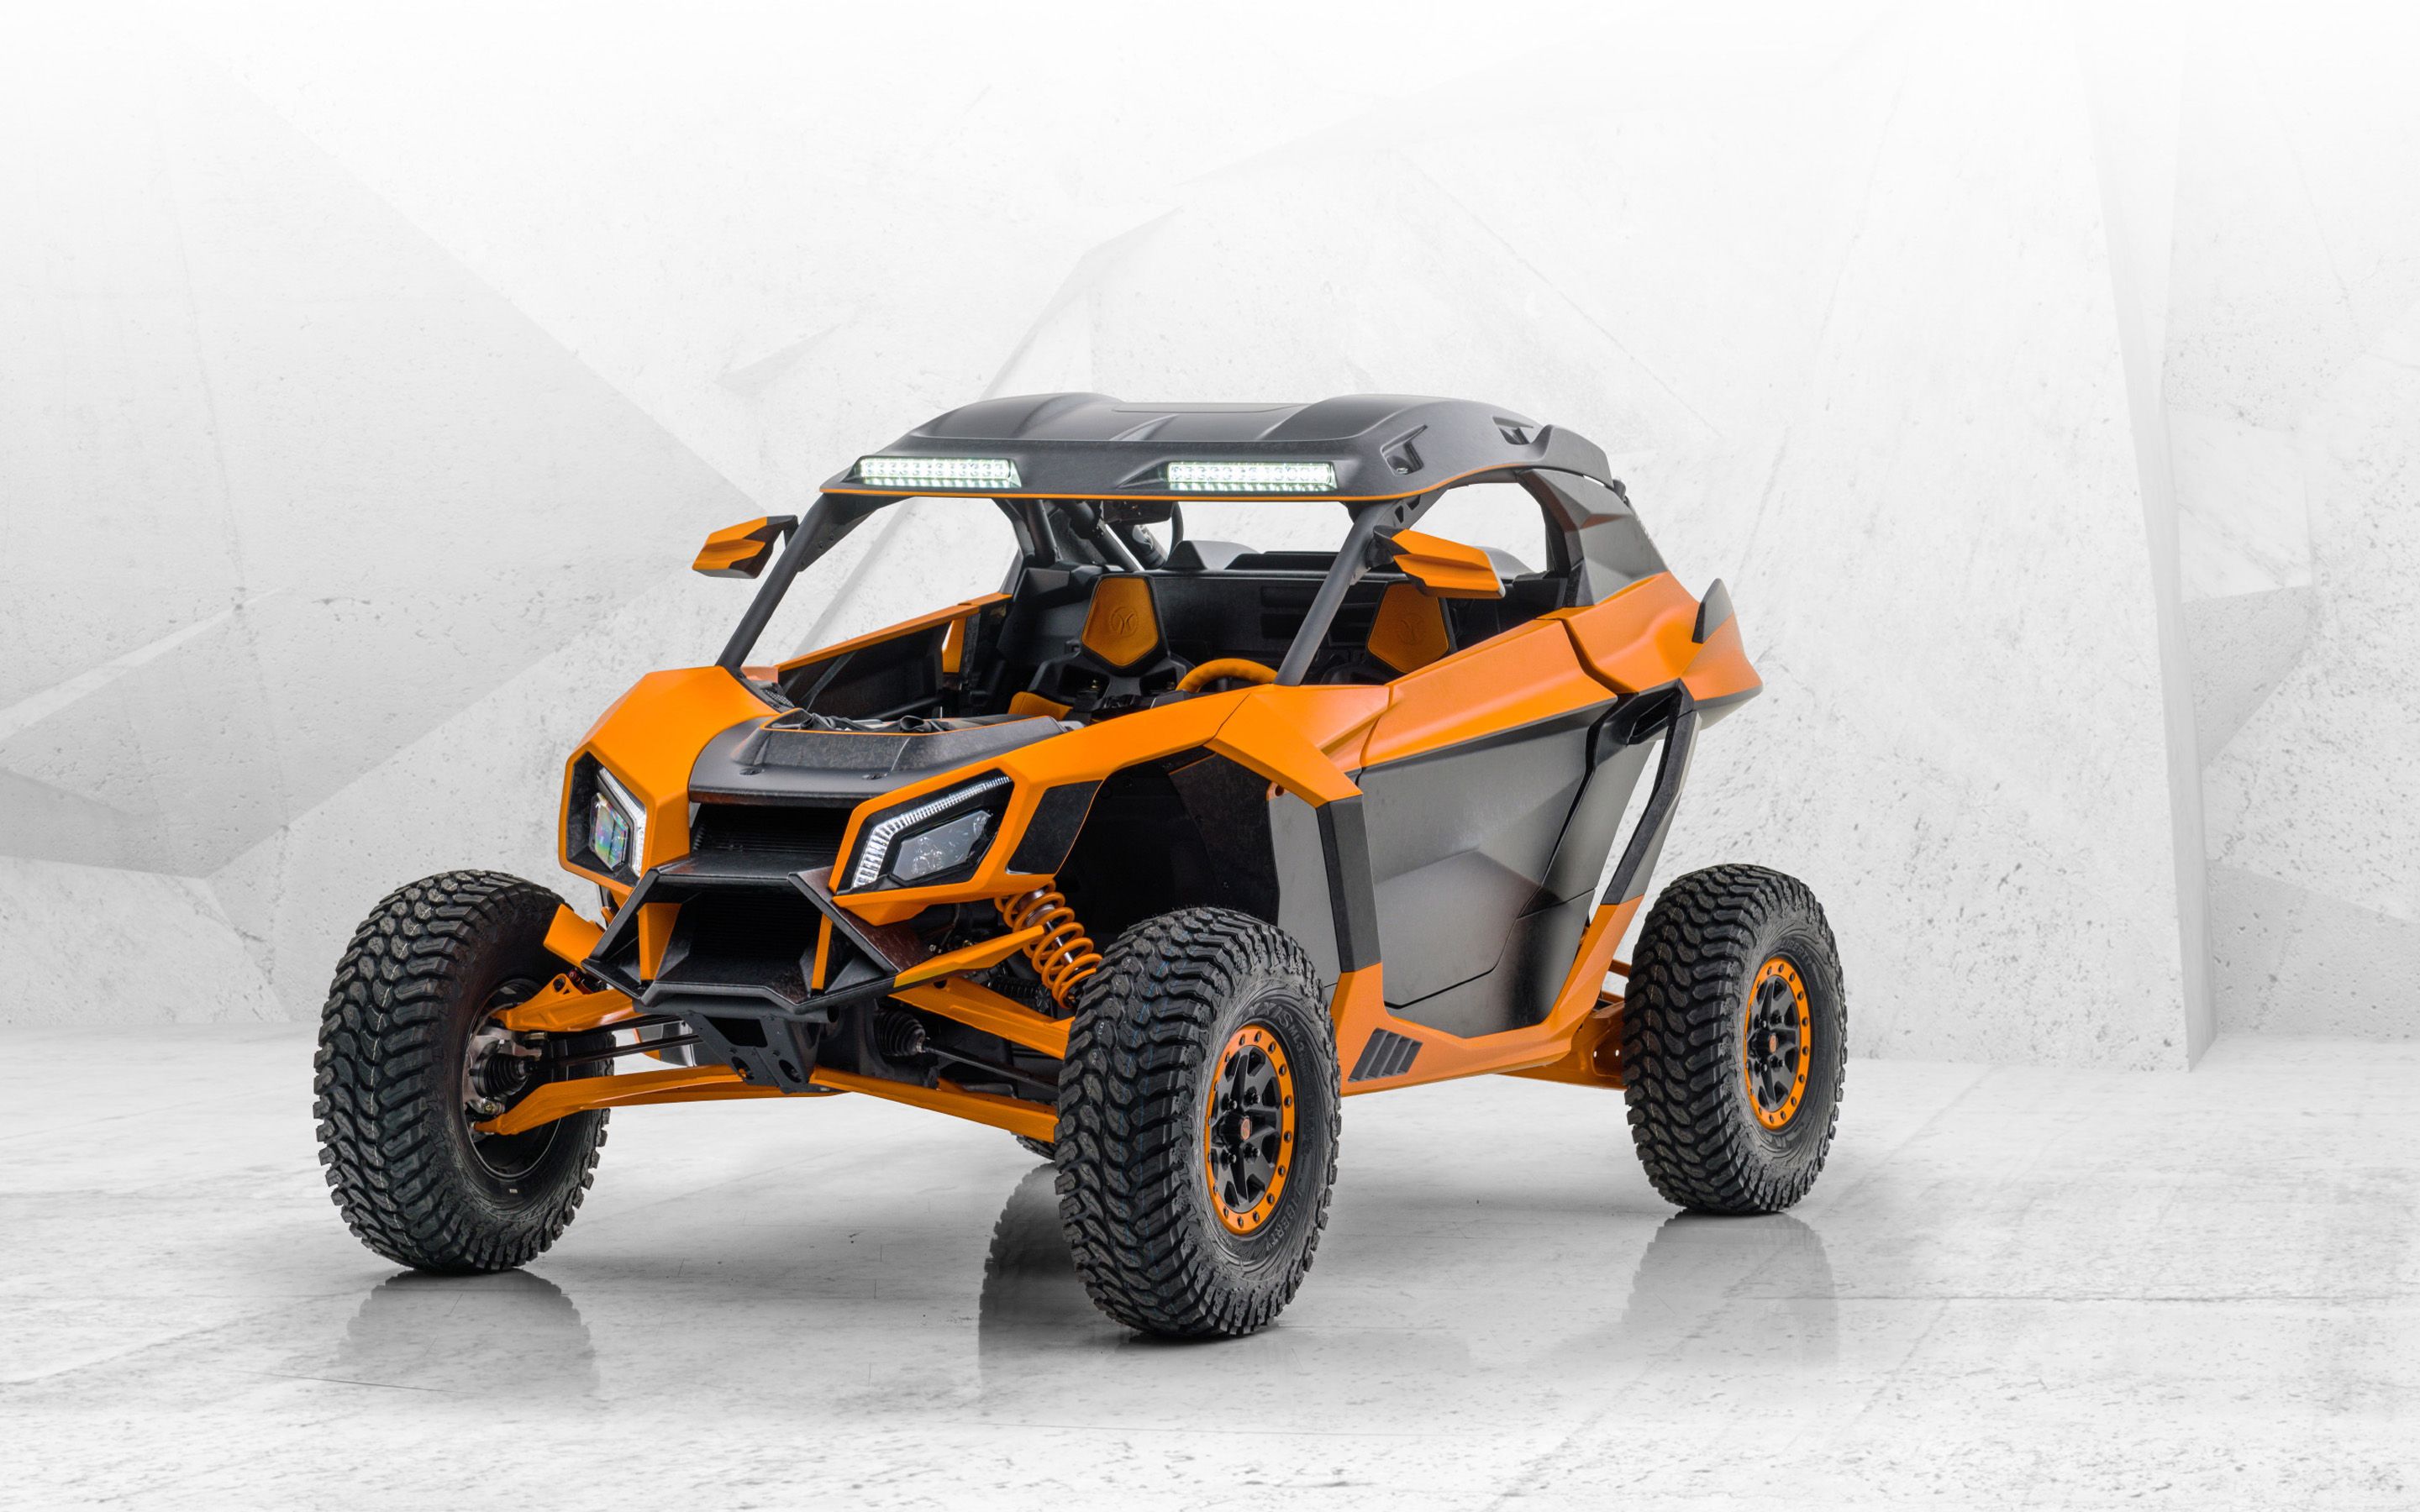 Download Wallpaper Mansory Xerocole, Tuning, 2020 ATVs, Can Am Maverick X ATVs, Can Am Off Road For Desktop With Resolution 2880x1800. High Quality HD Picture Wallpaper